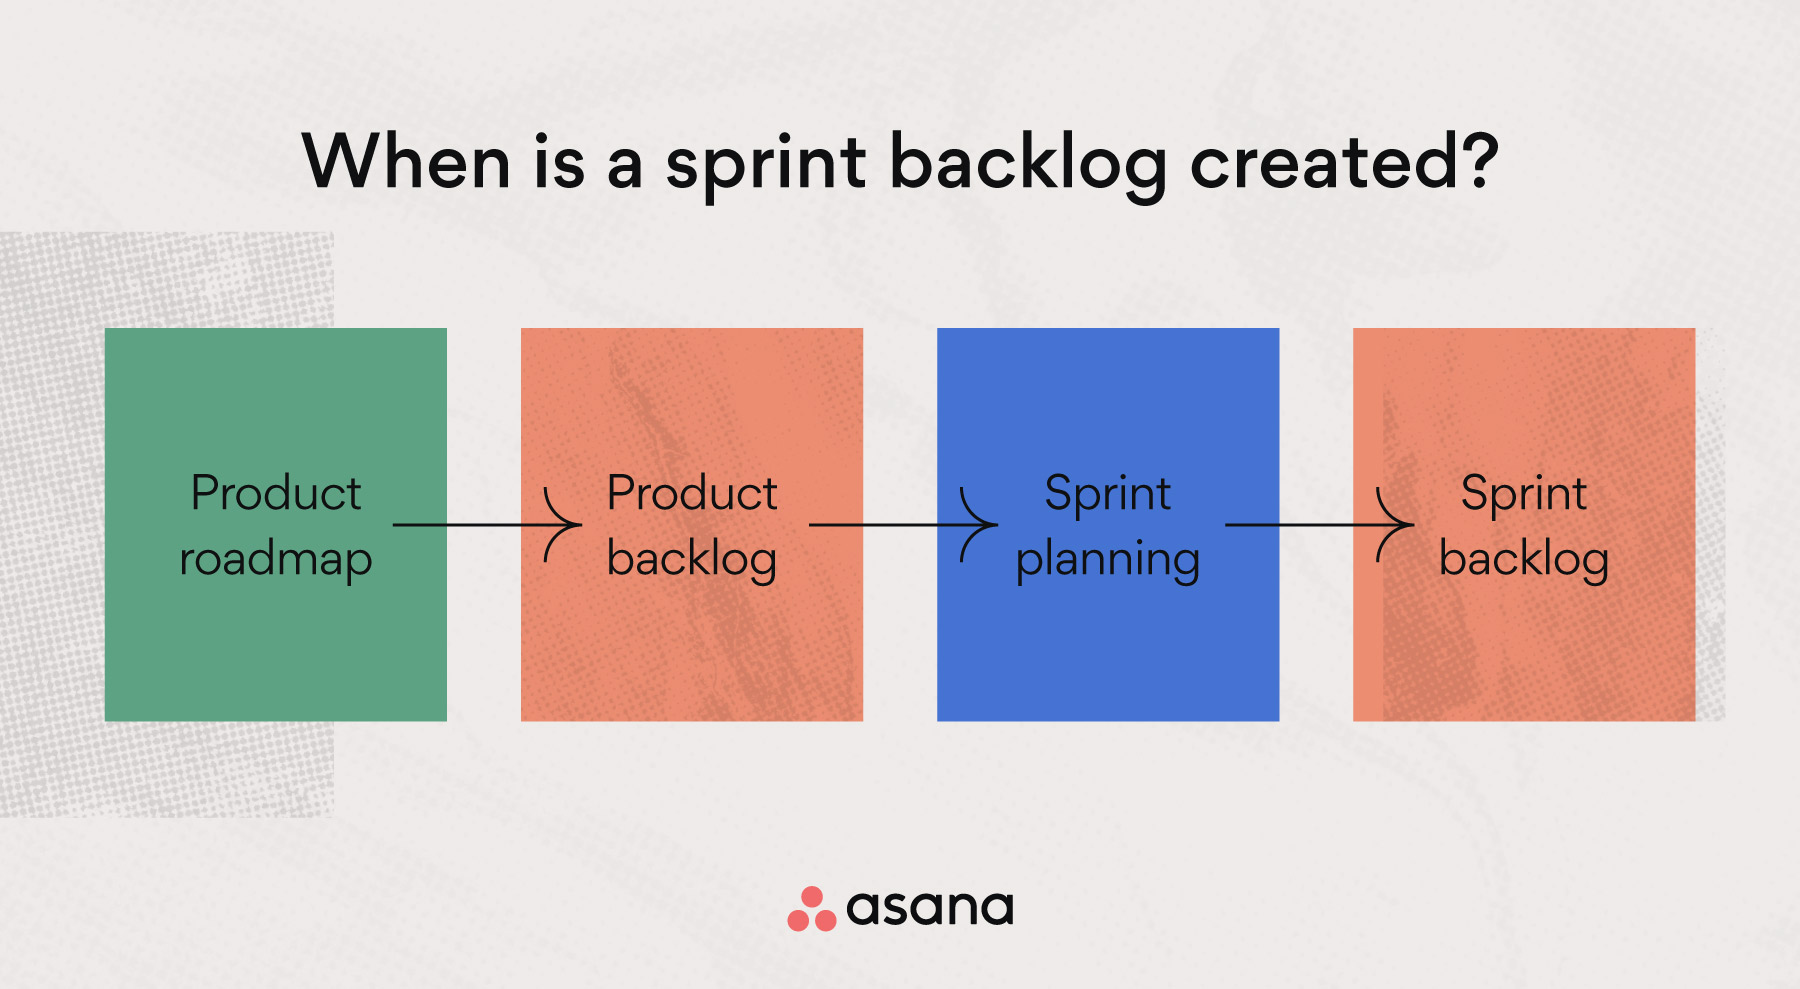 When is a sprint backlog created?